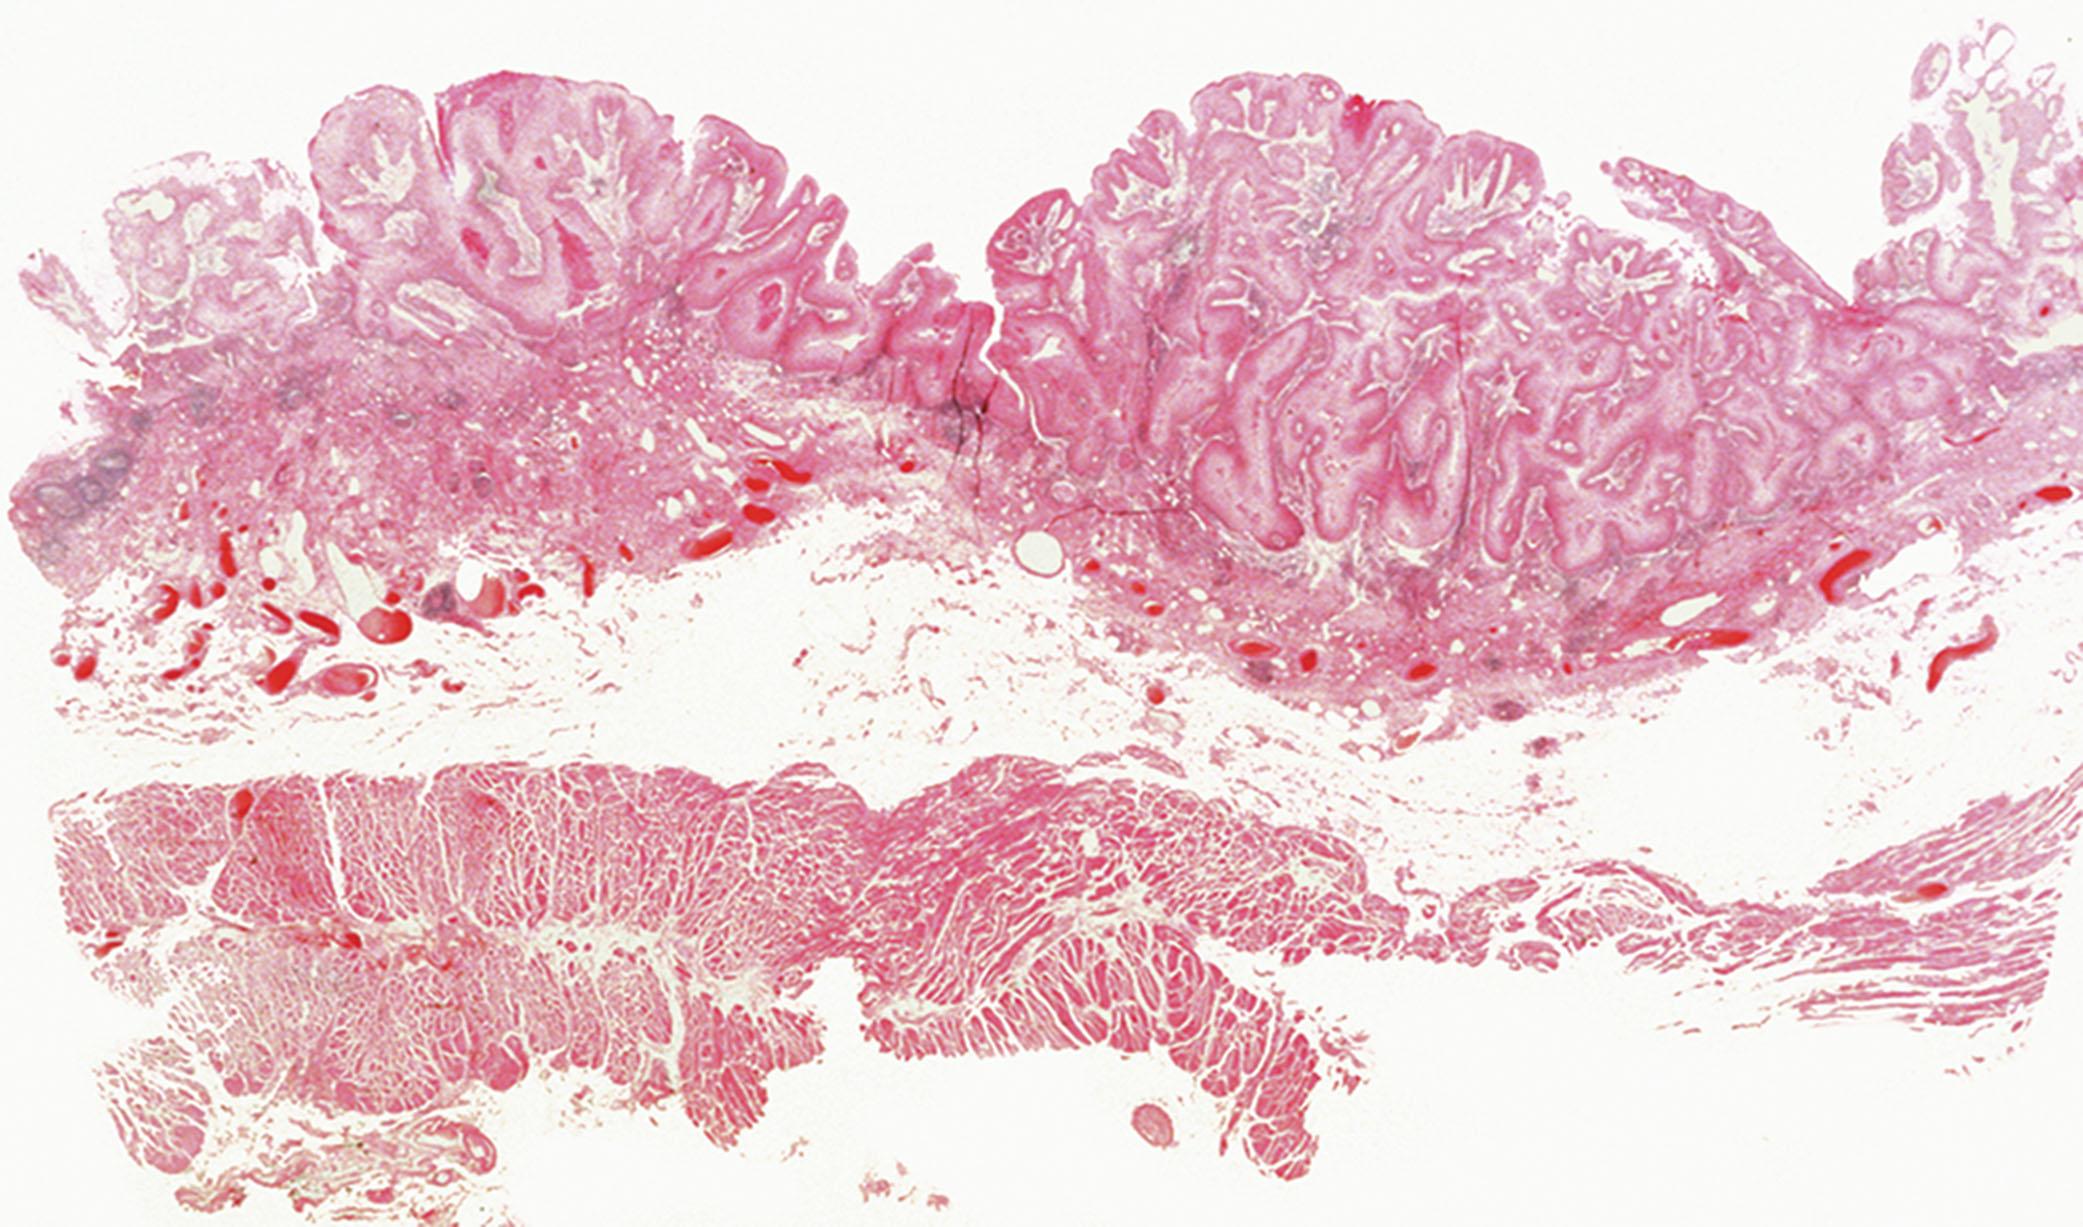 Figure 2.2, Esophageal papillomatosis in a young patient with tracheal papillomatosis associated with human papillomavirus.